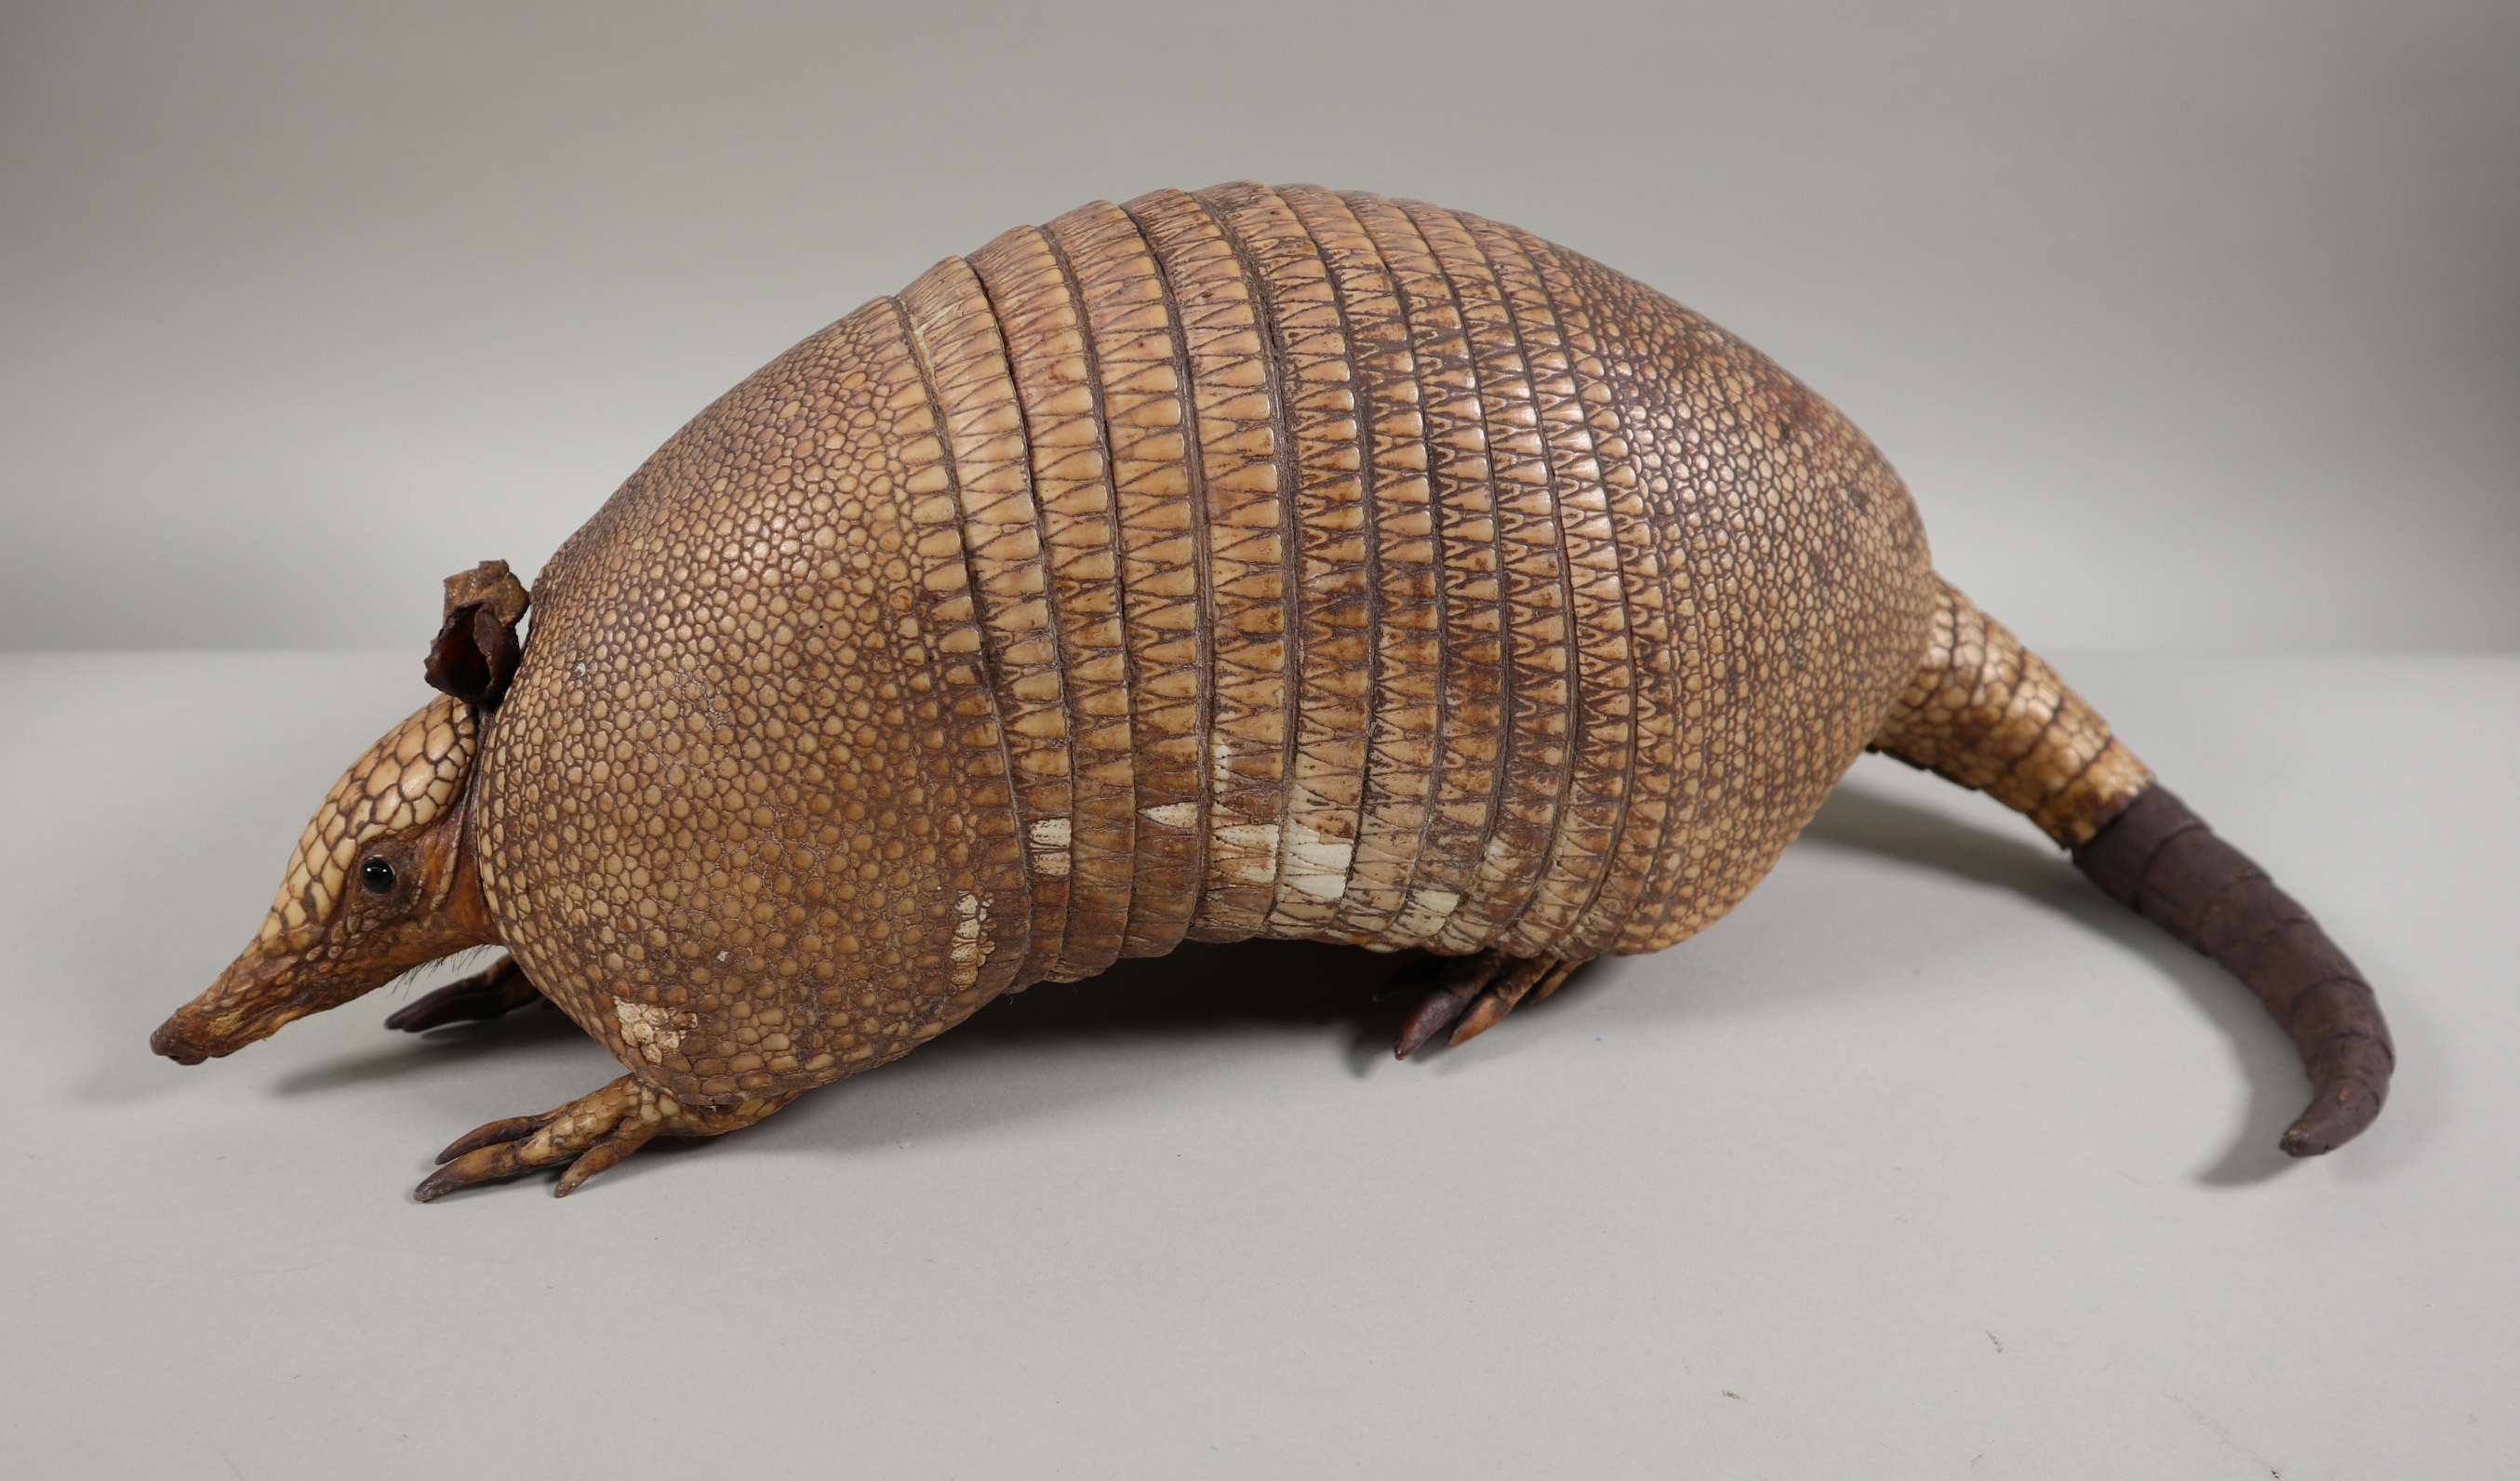 A taxidermied common long-nose armadillo in the Museum's collection.